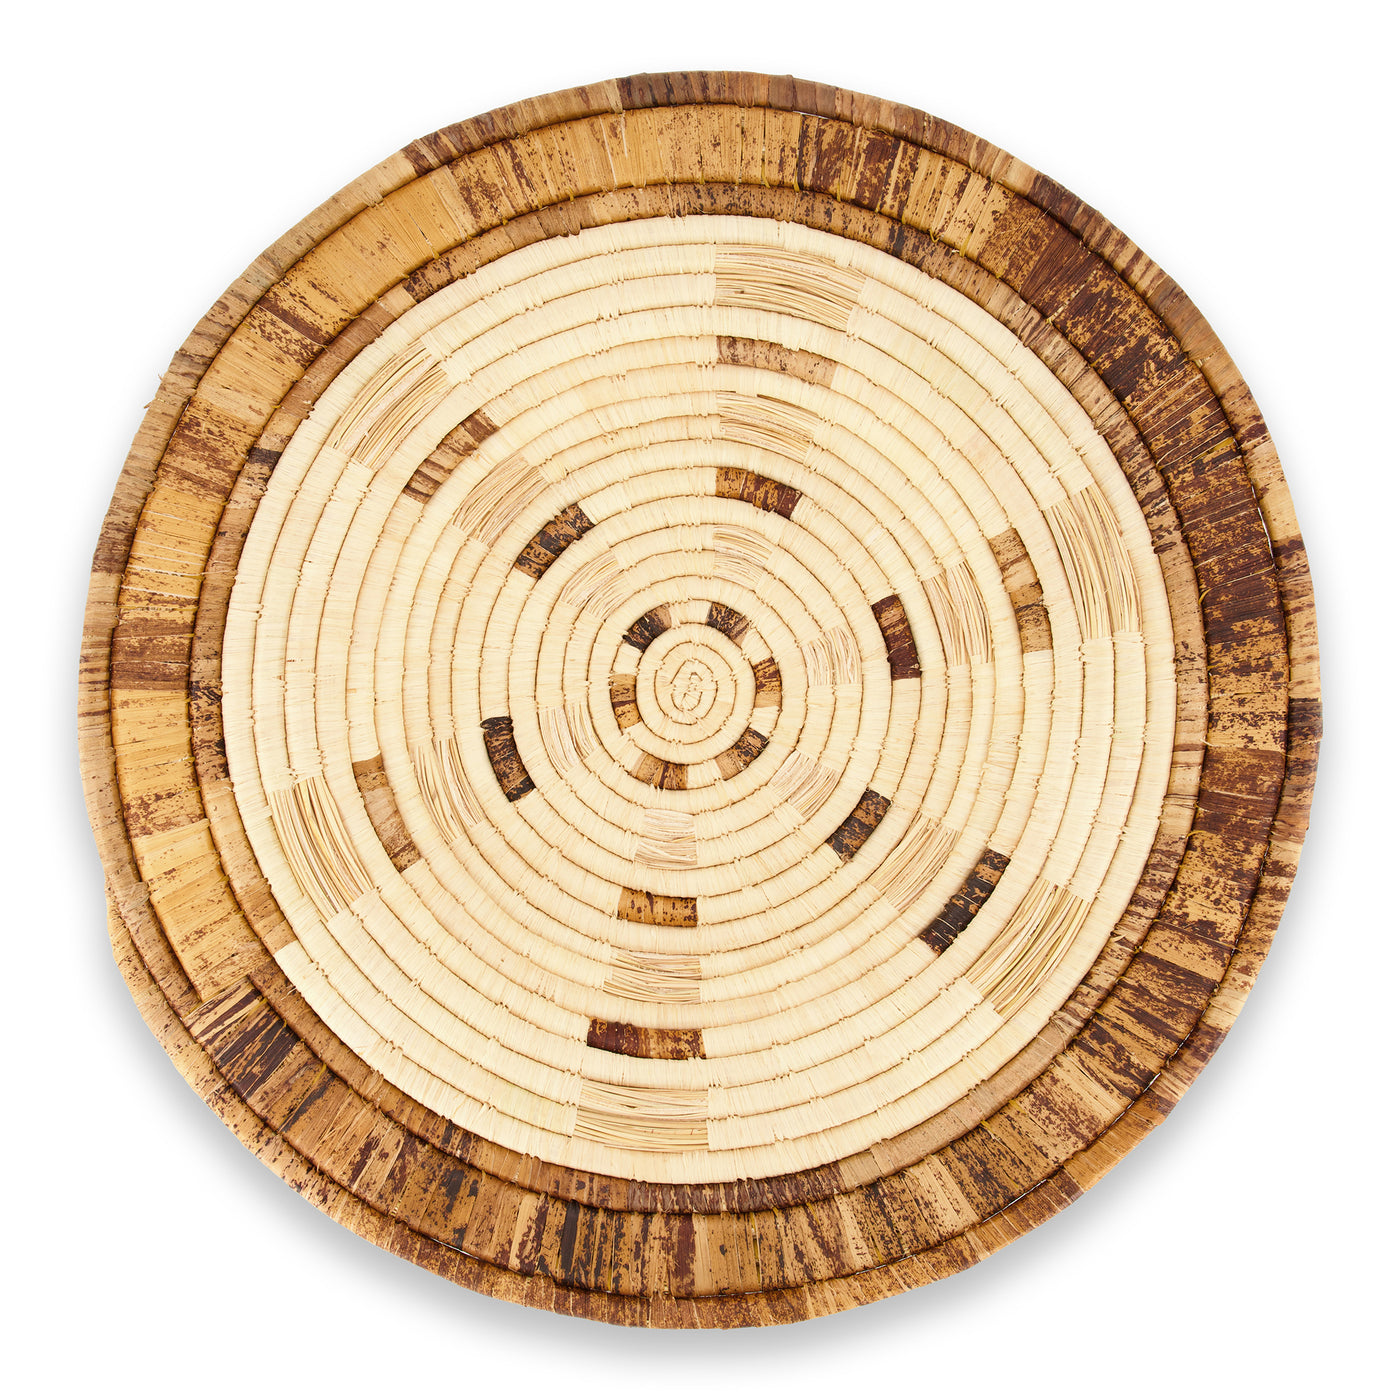 Town Square Wall Plate - 21" Bark Grains